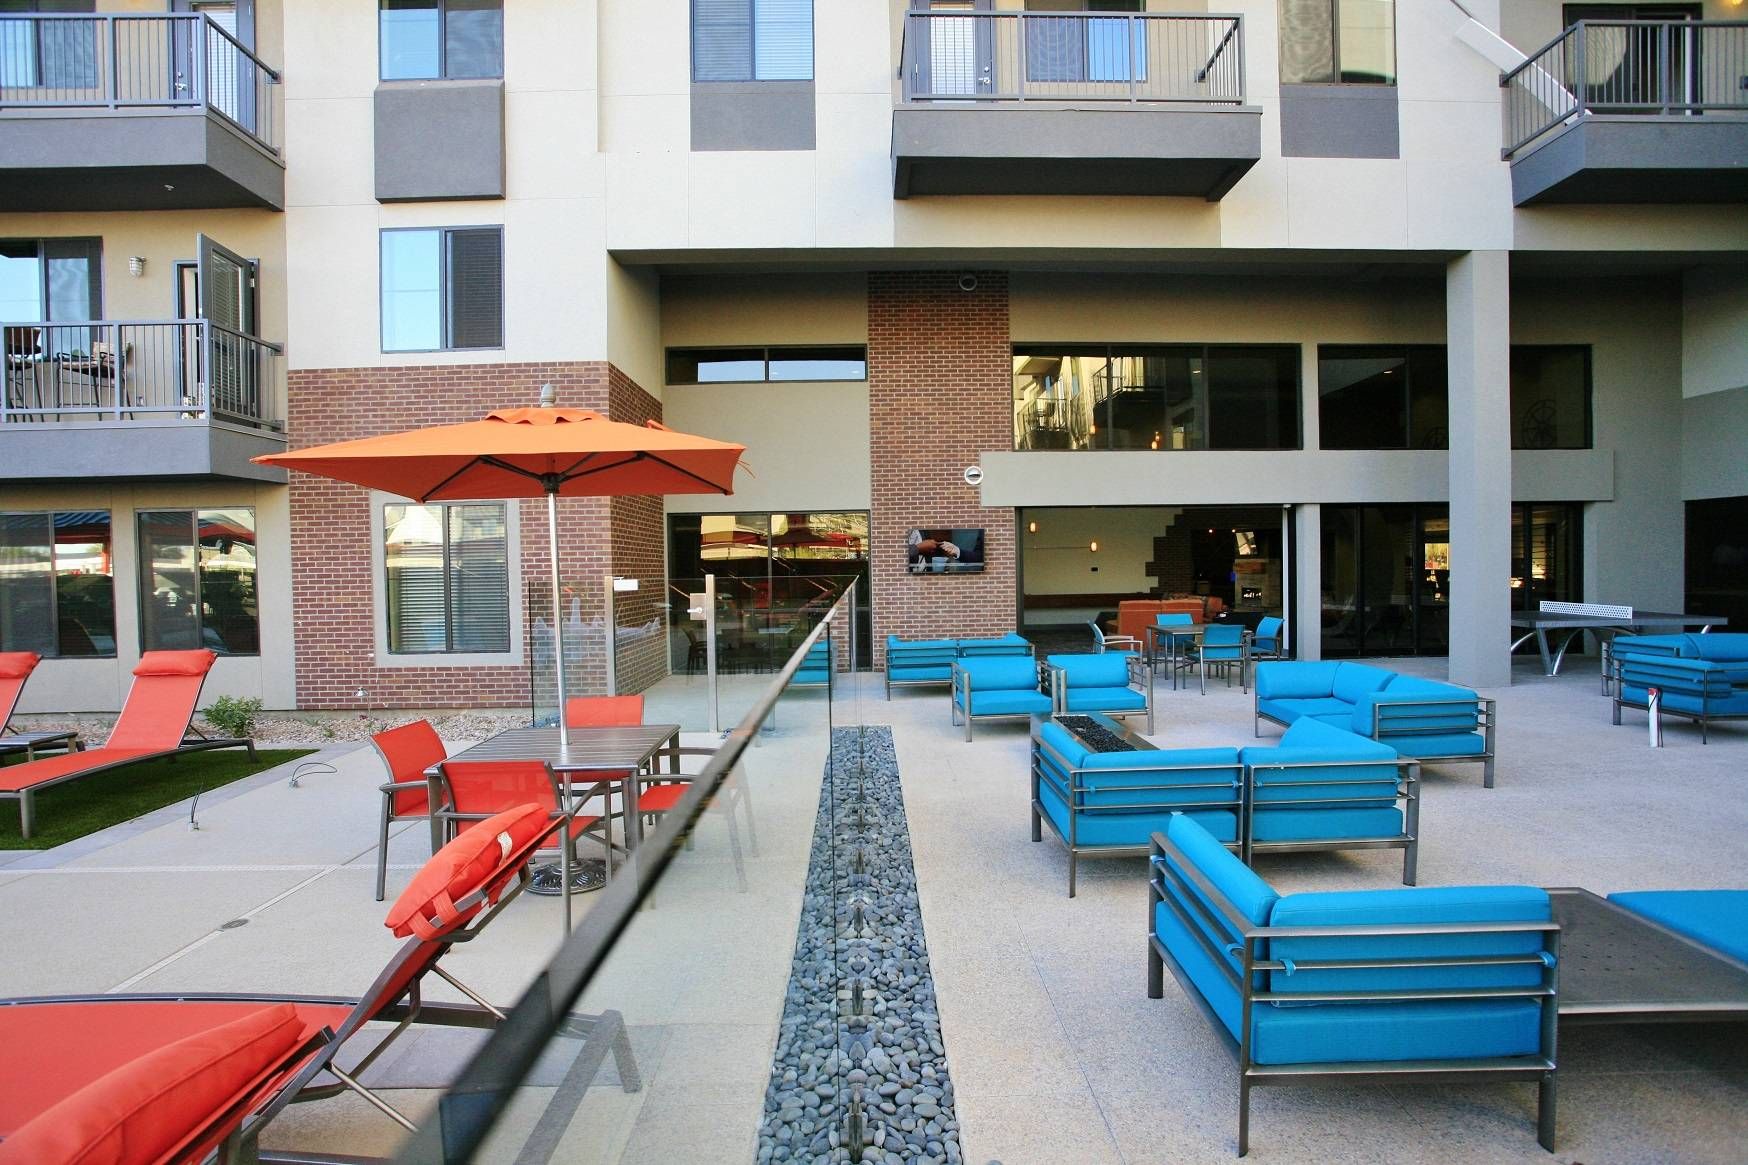 A vibrant outdoor courtyard at Alta Steelyard Lofts with red sun loungers, blue sofas, and an orange umbrella.